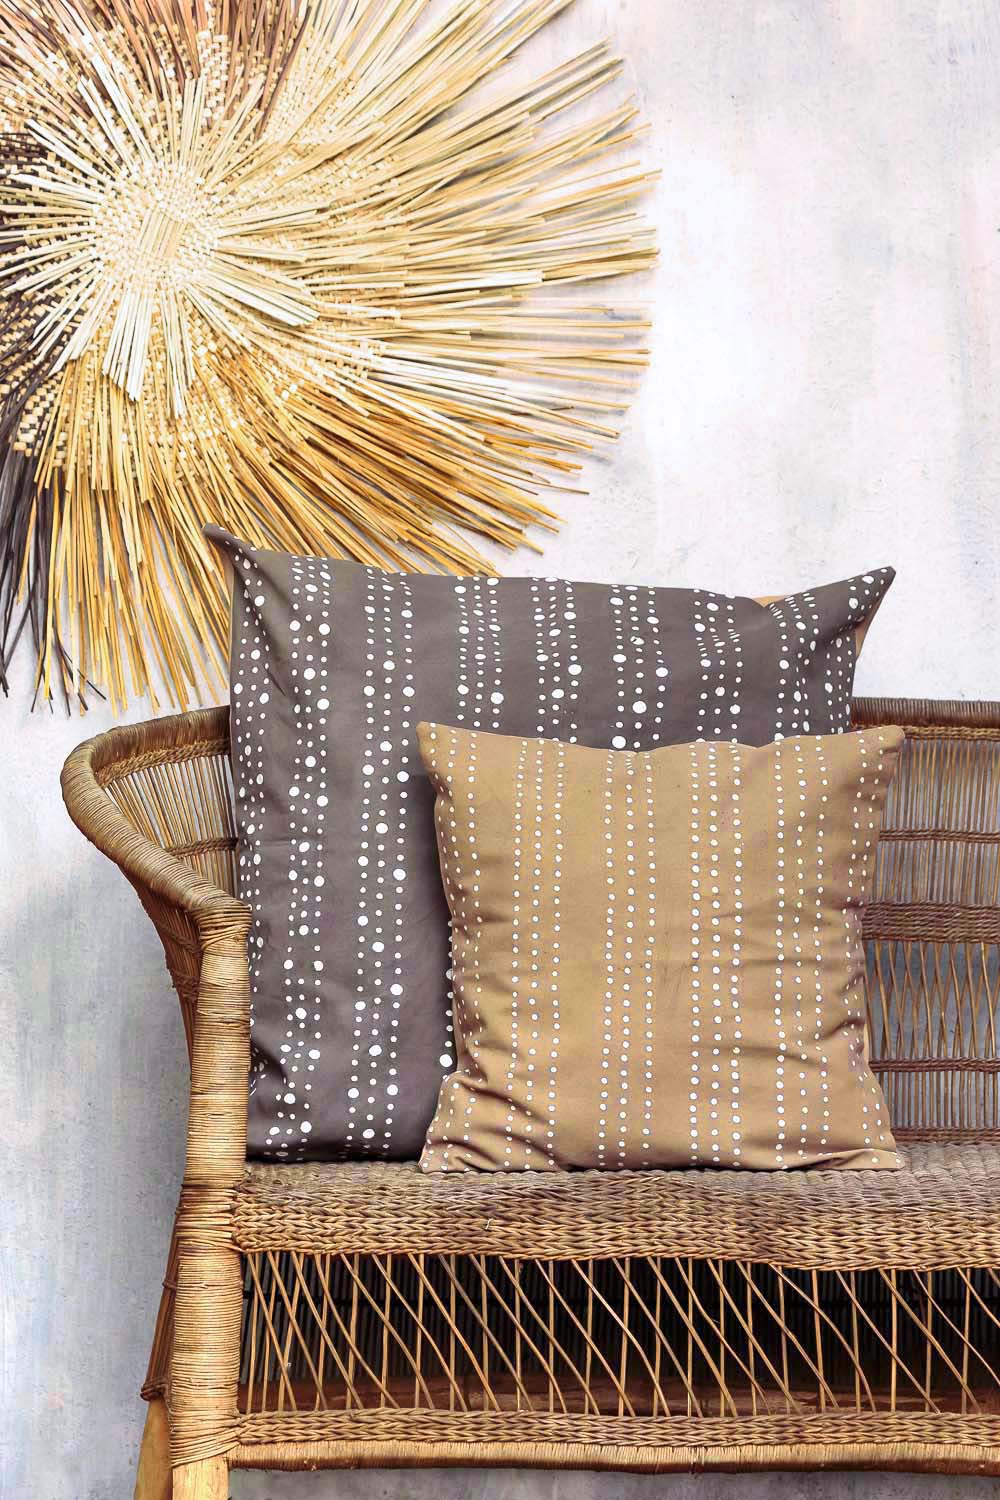 Tribal Cloth Mushroom Dots Cushion Cover - Hand Painted by TRIBAL TEXTILES - Handcrafted Home Decor Interiors - African Made